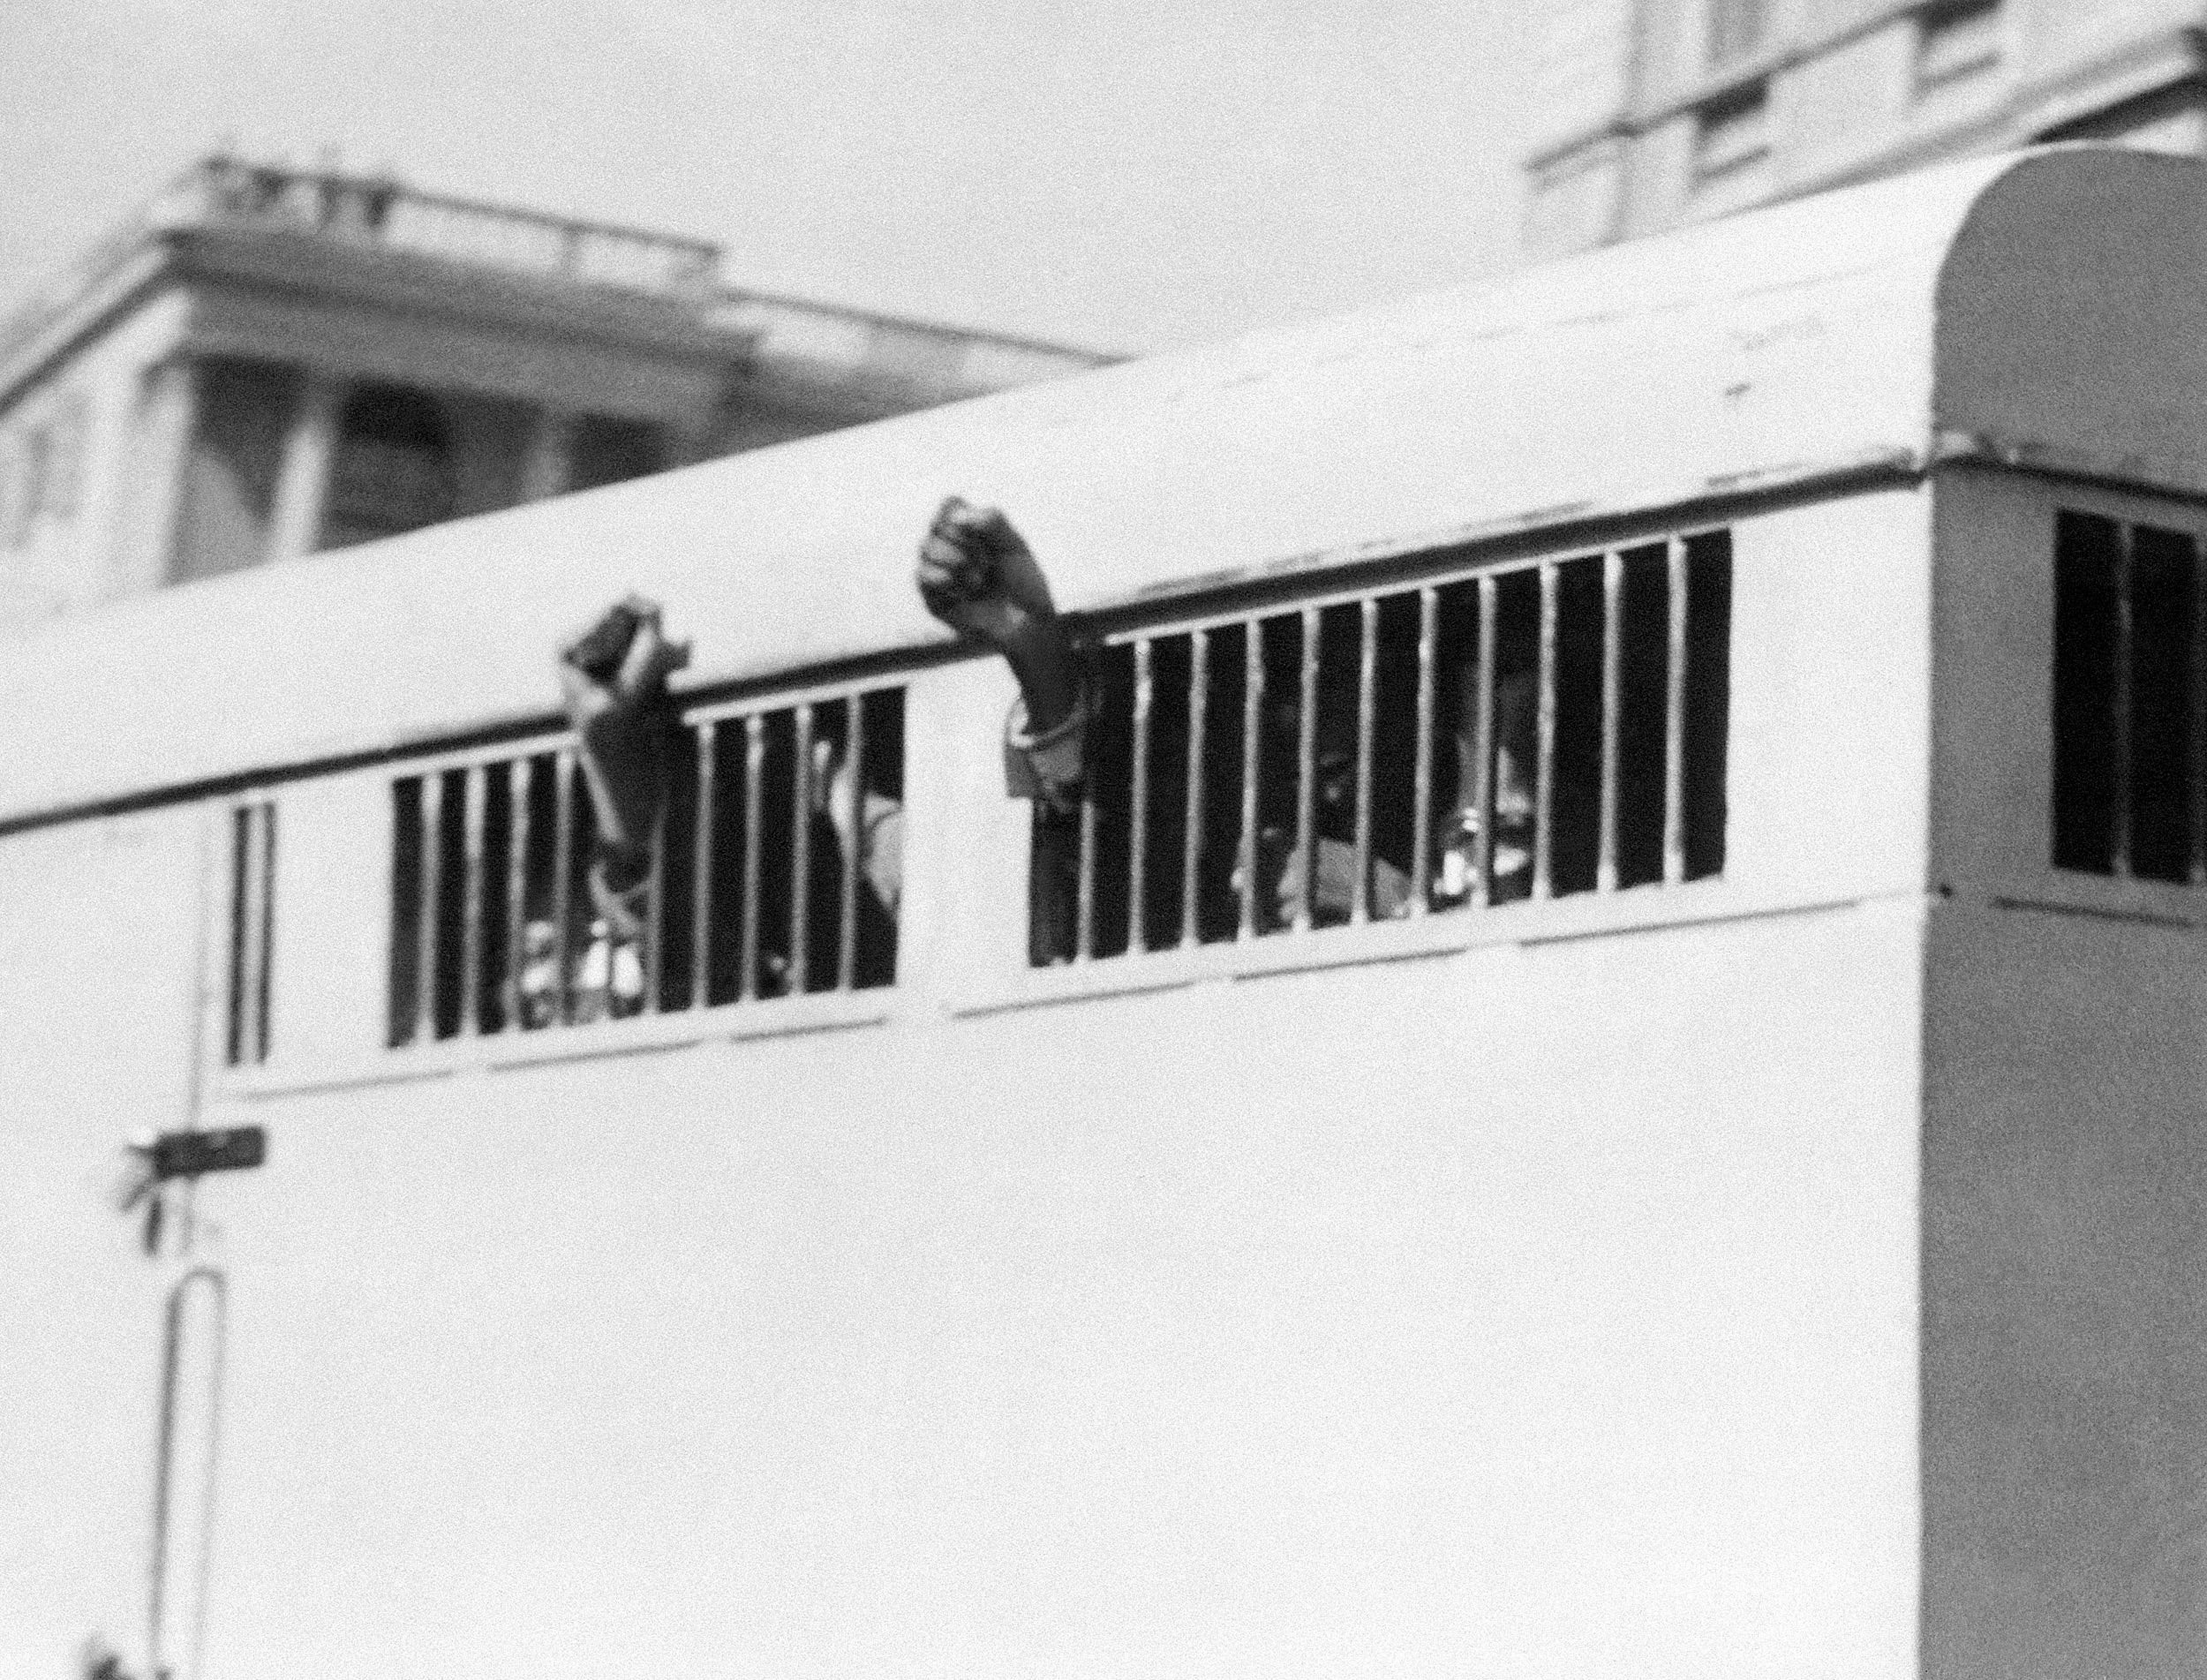 Eight men, among them Nelson Mandela, sentenced to life imprisonment in the Rivonia trial leave the Palace of Justice in Pretoria on 12 June 1964